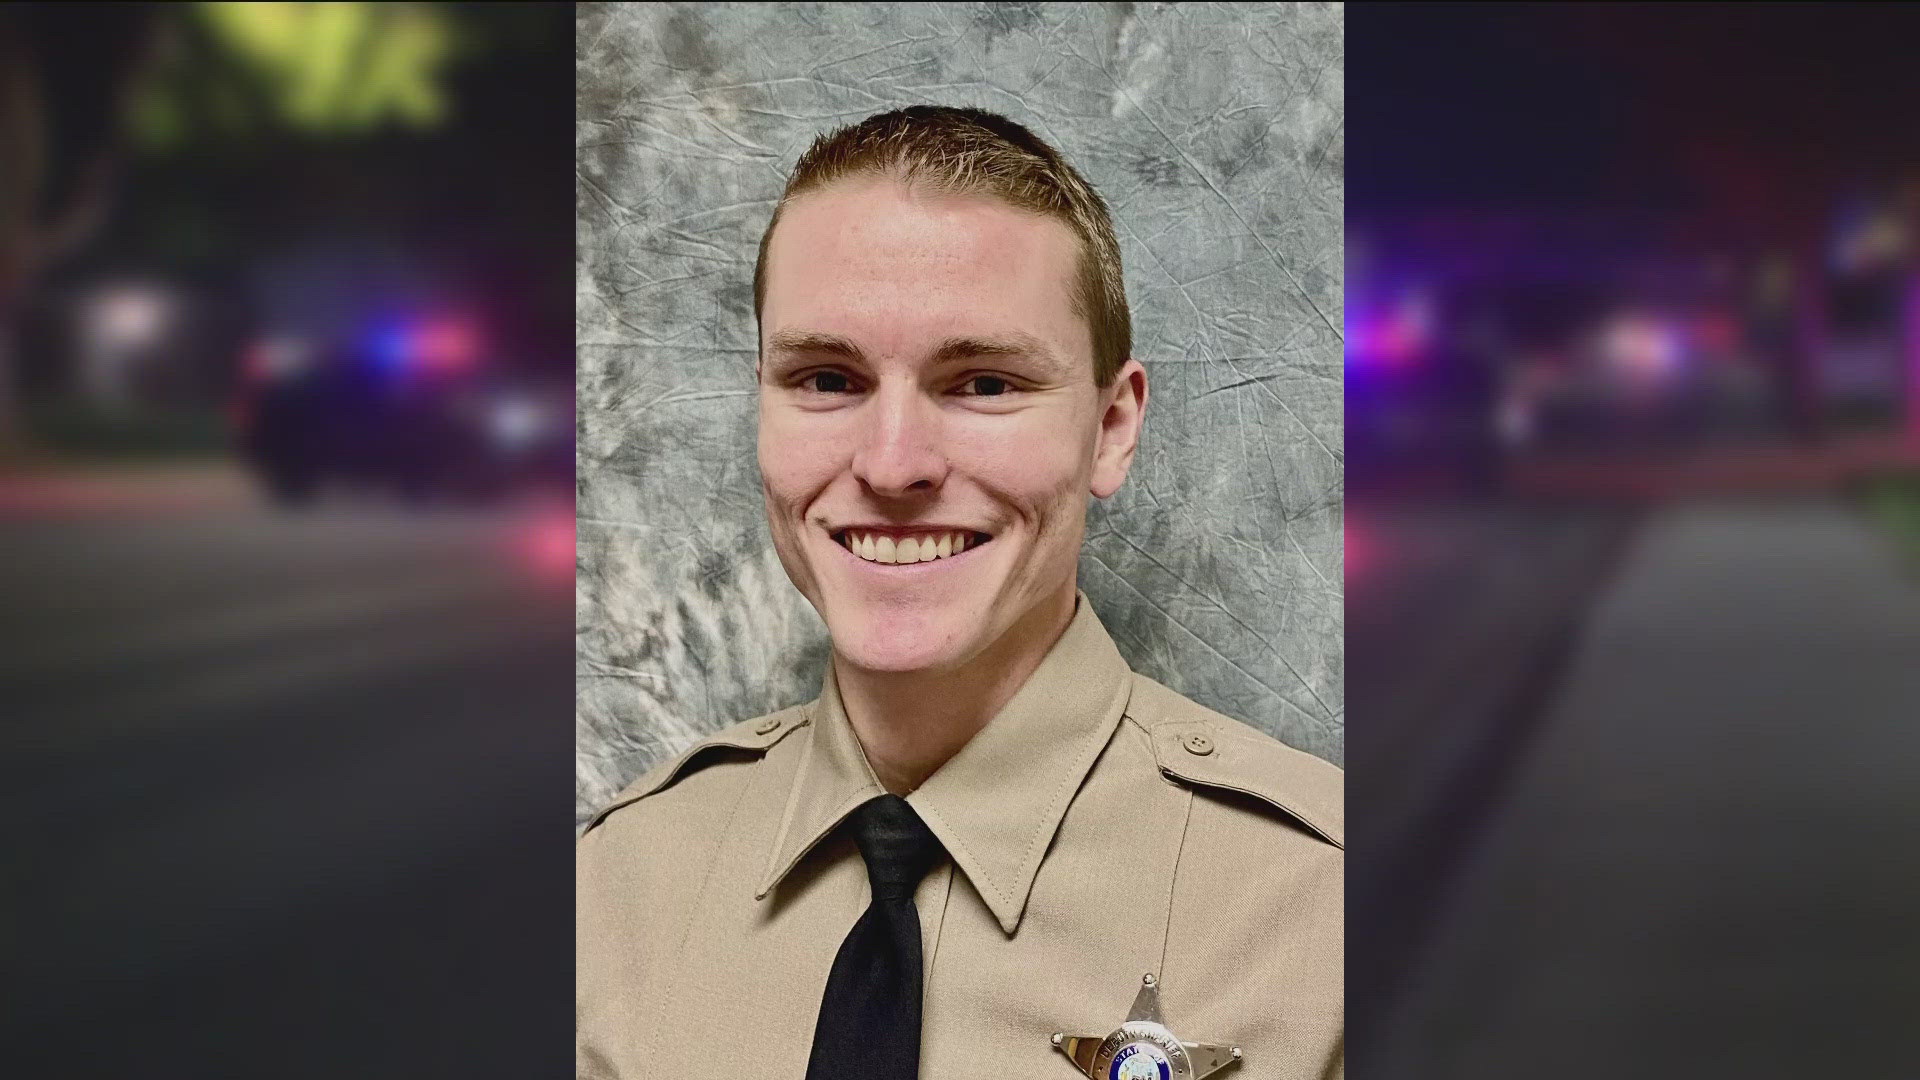 The City of Star stated the vigil for Deputy Tobin Bolter, killed in the line of duty, will be at 9 p.m. on April 23, near the Hunter's Creek Park flagpole.